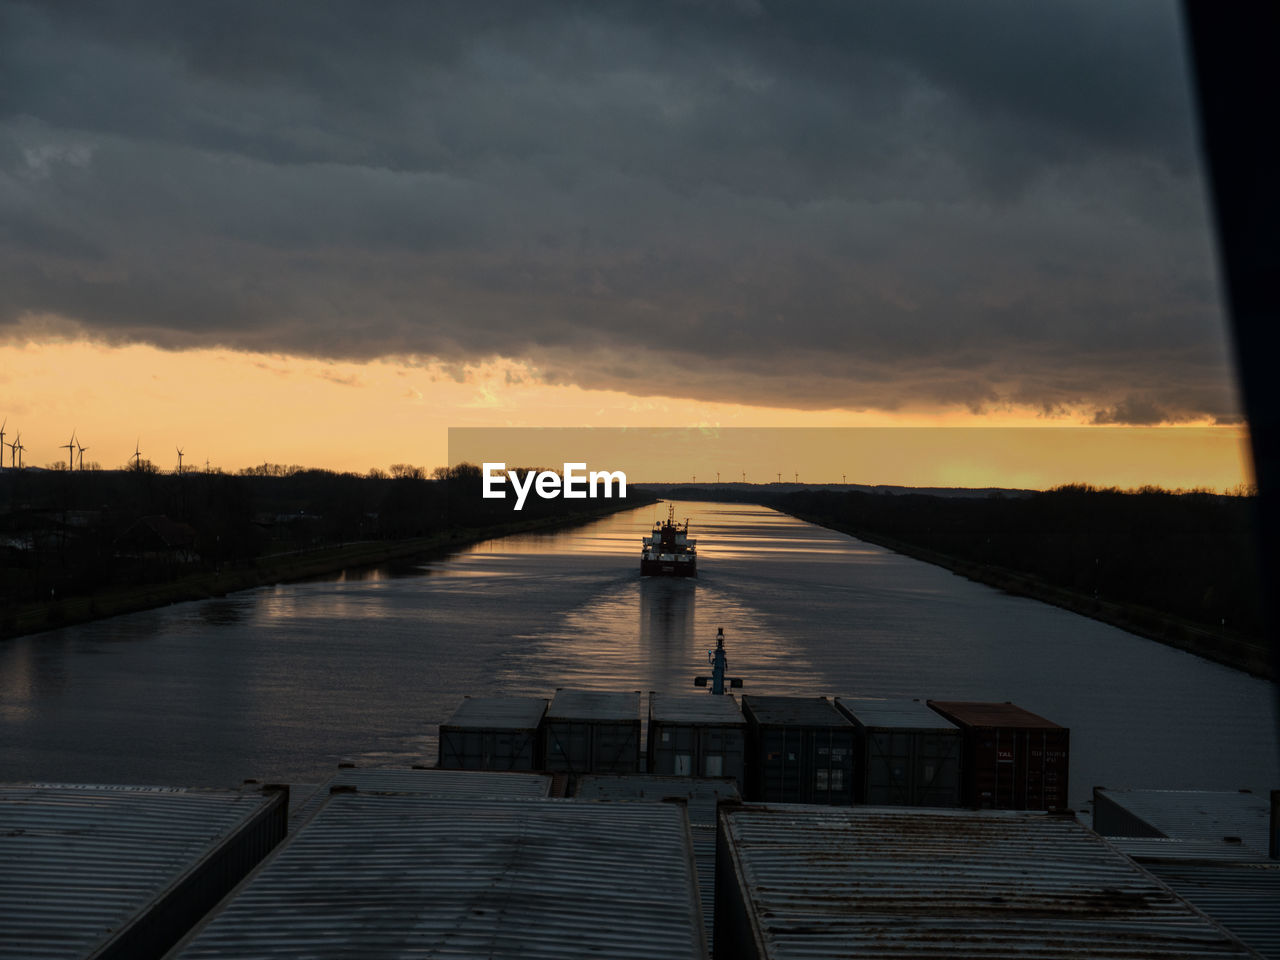 Container ship in kiel canal against cloudy sky during sunset